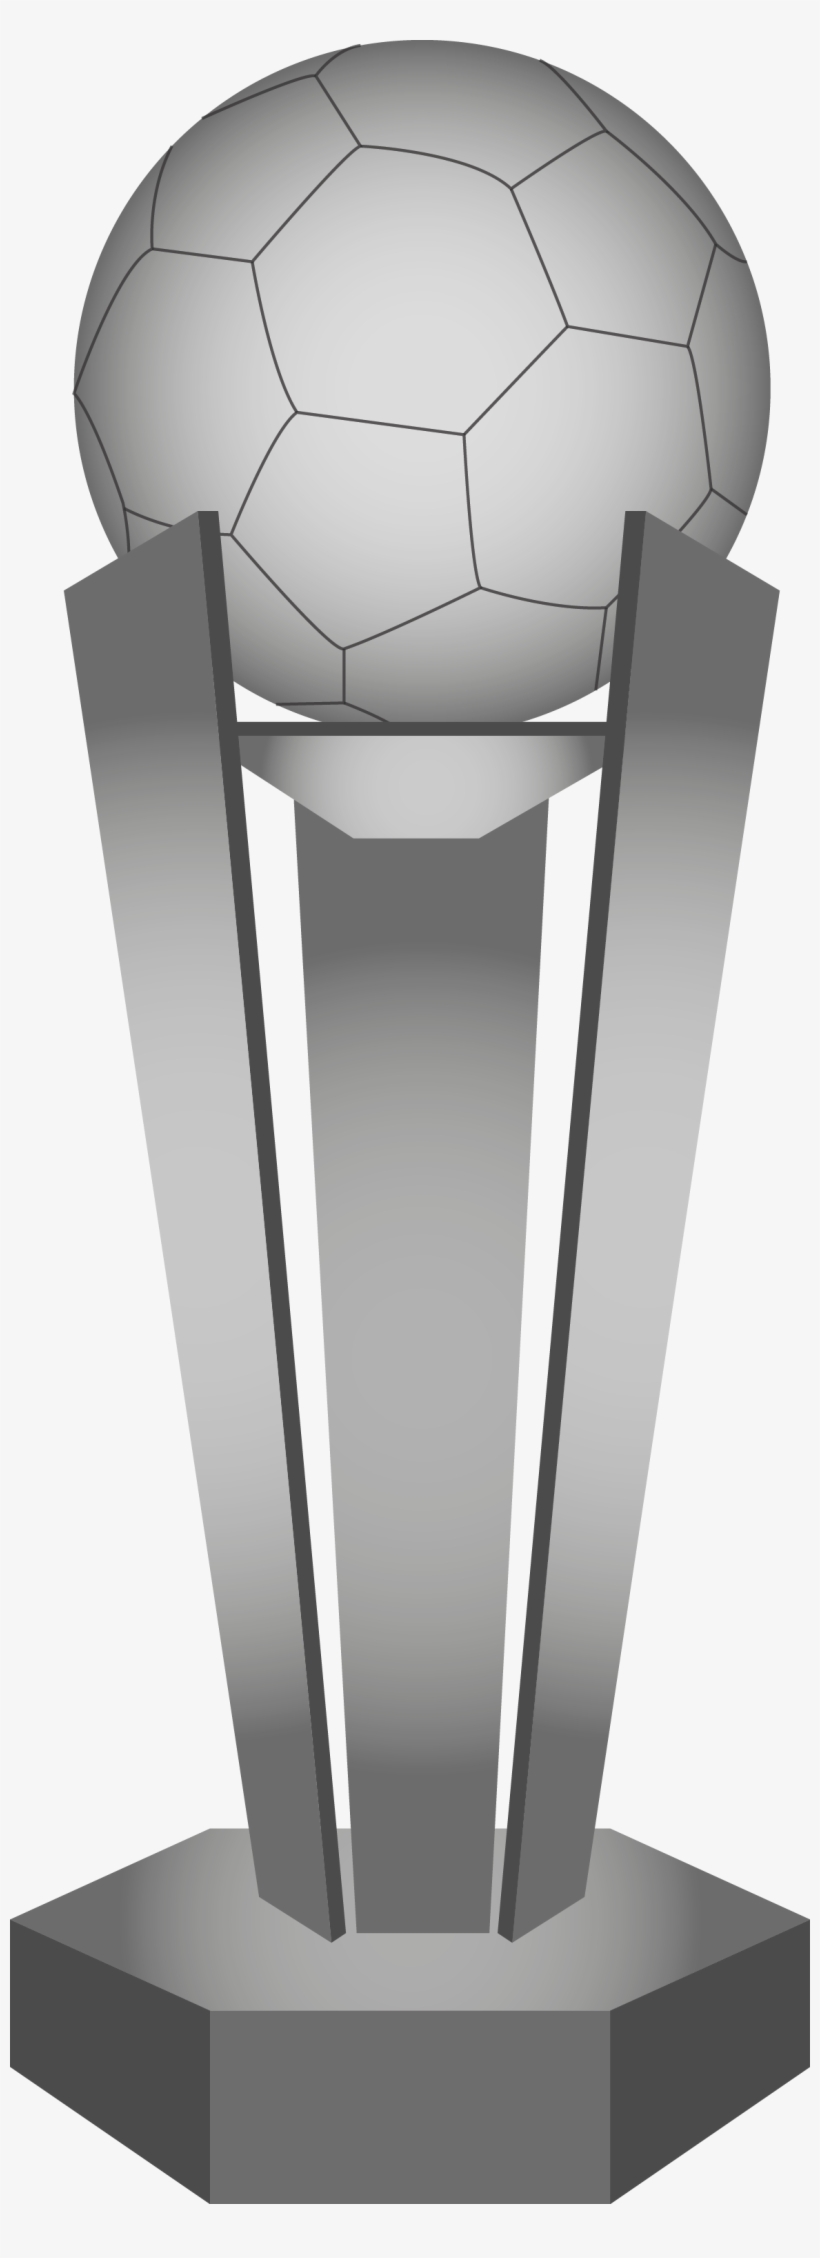 2013 Costa Rican Cup - Trophy, transparent png #5701730